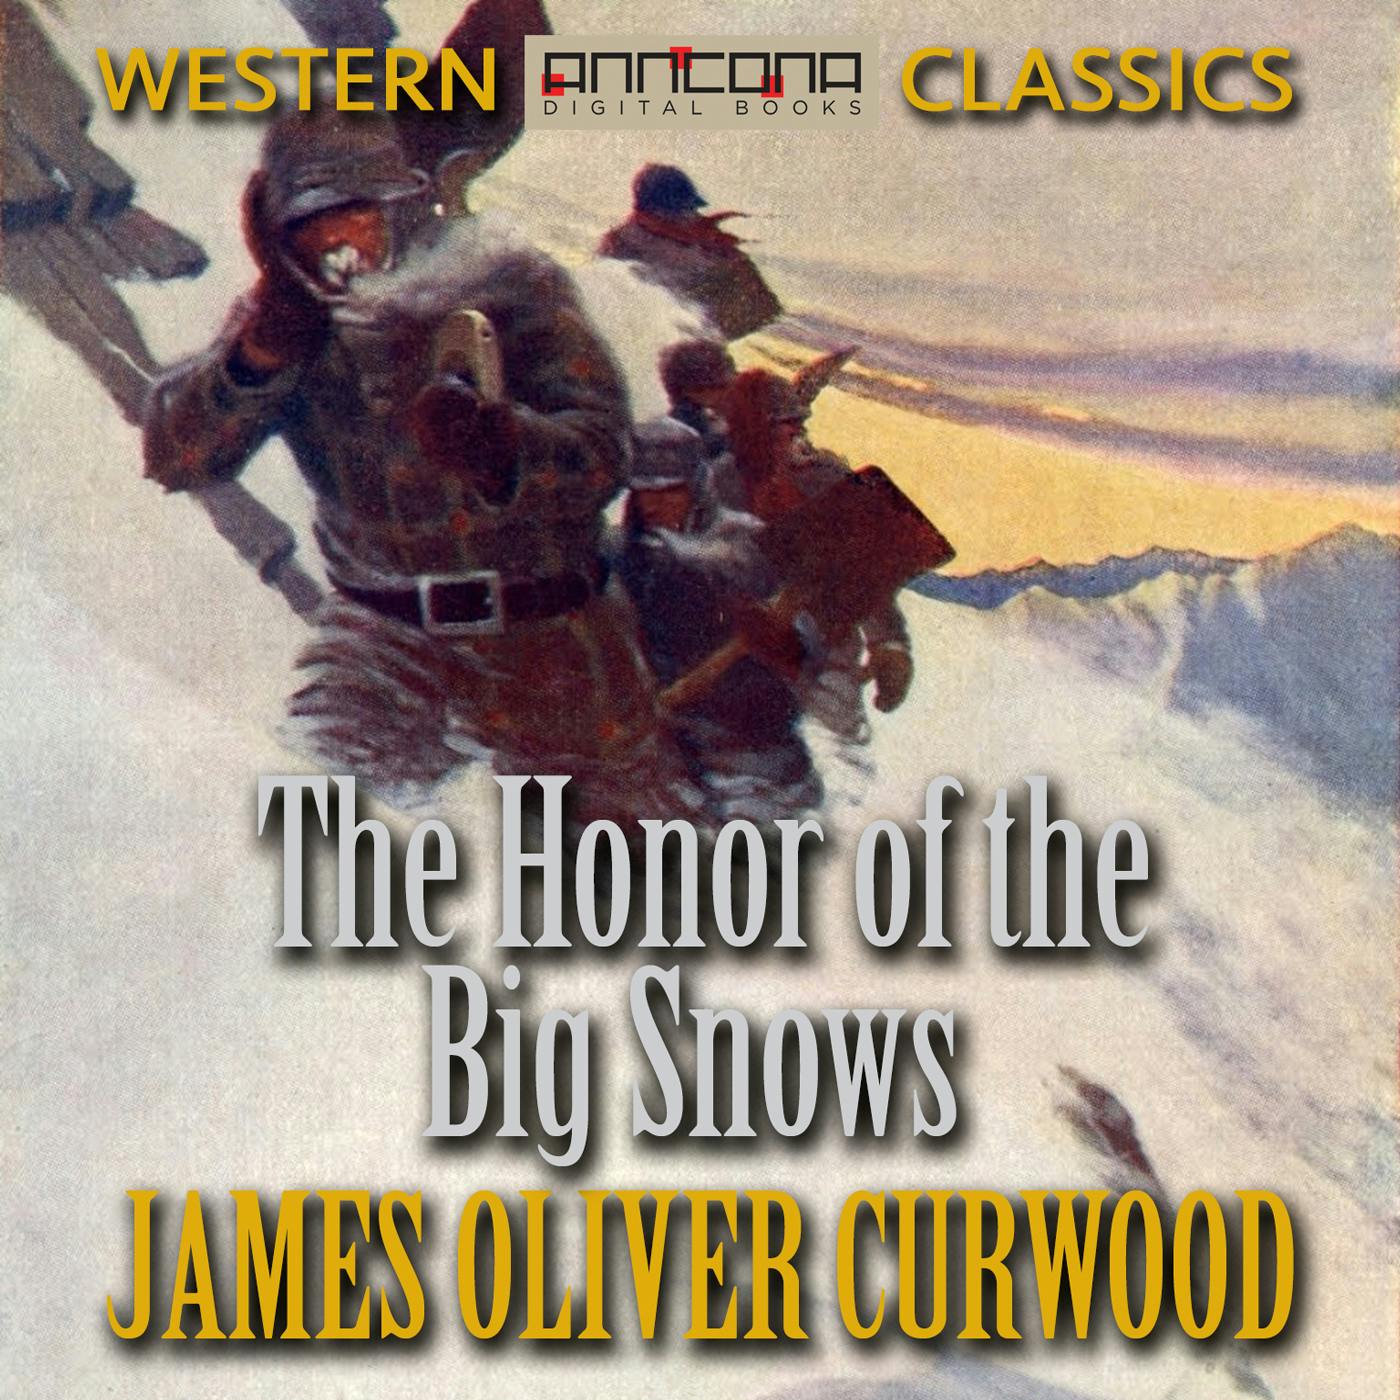 The Honor of the Big Snows - James Oliver Curwood